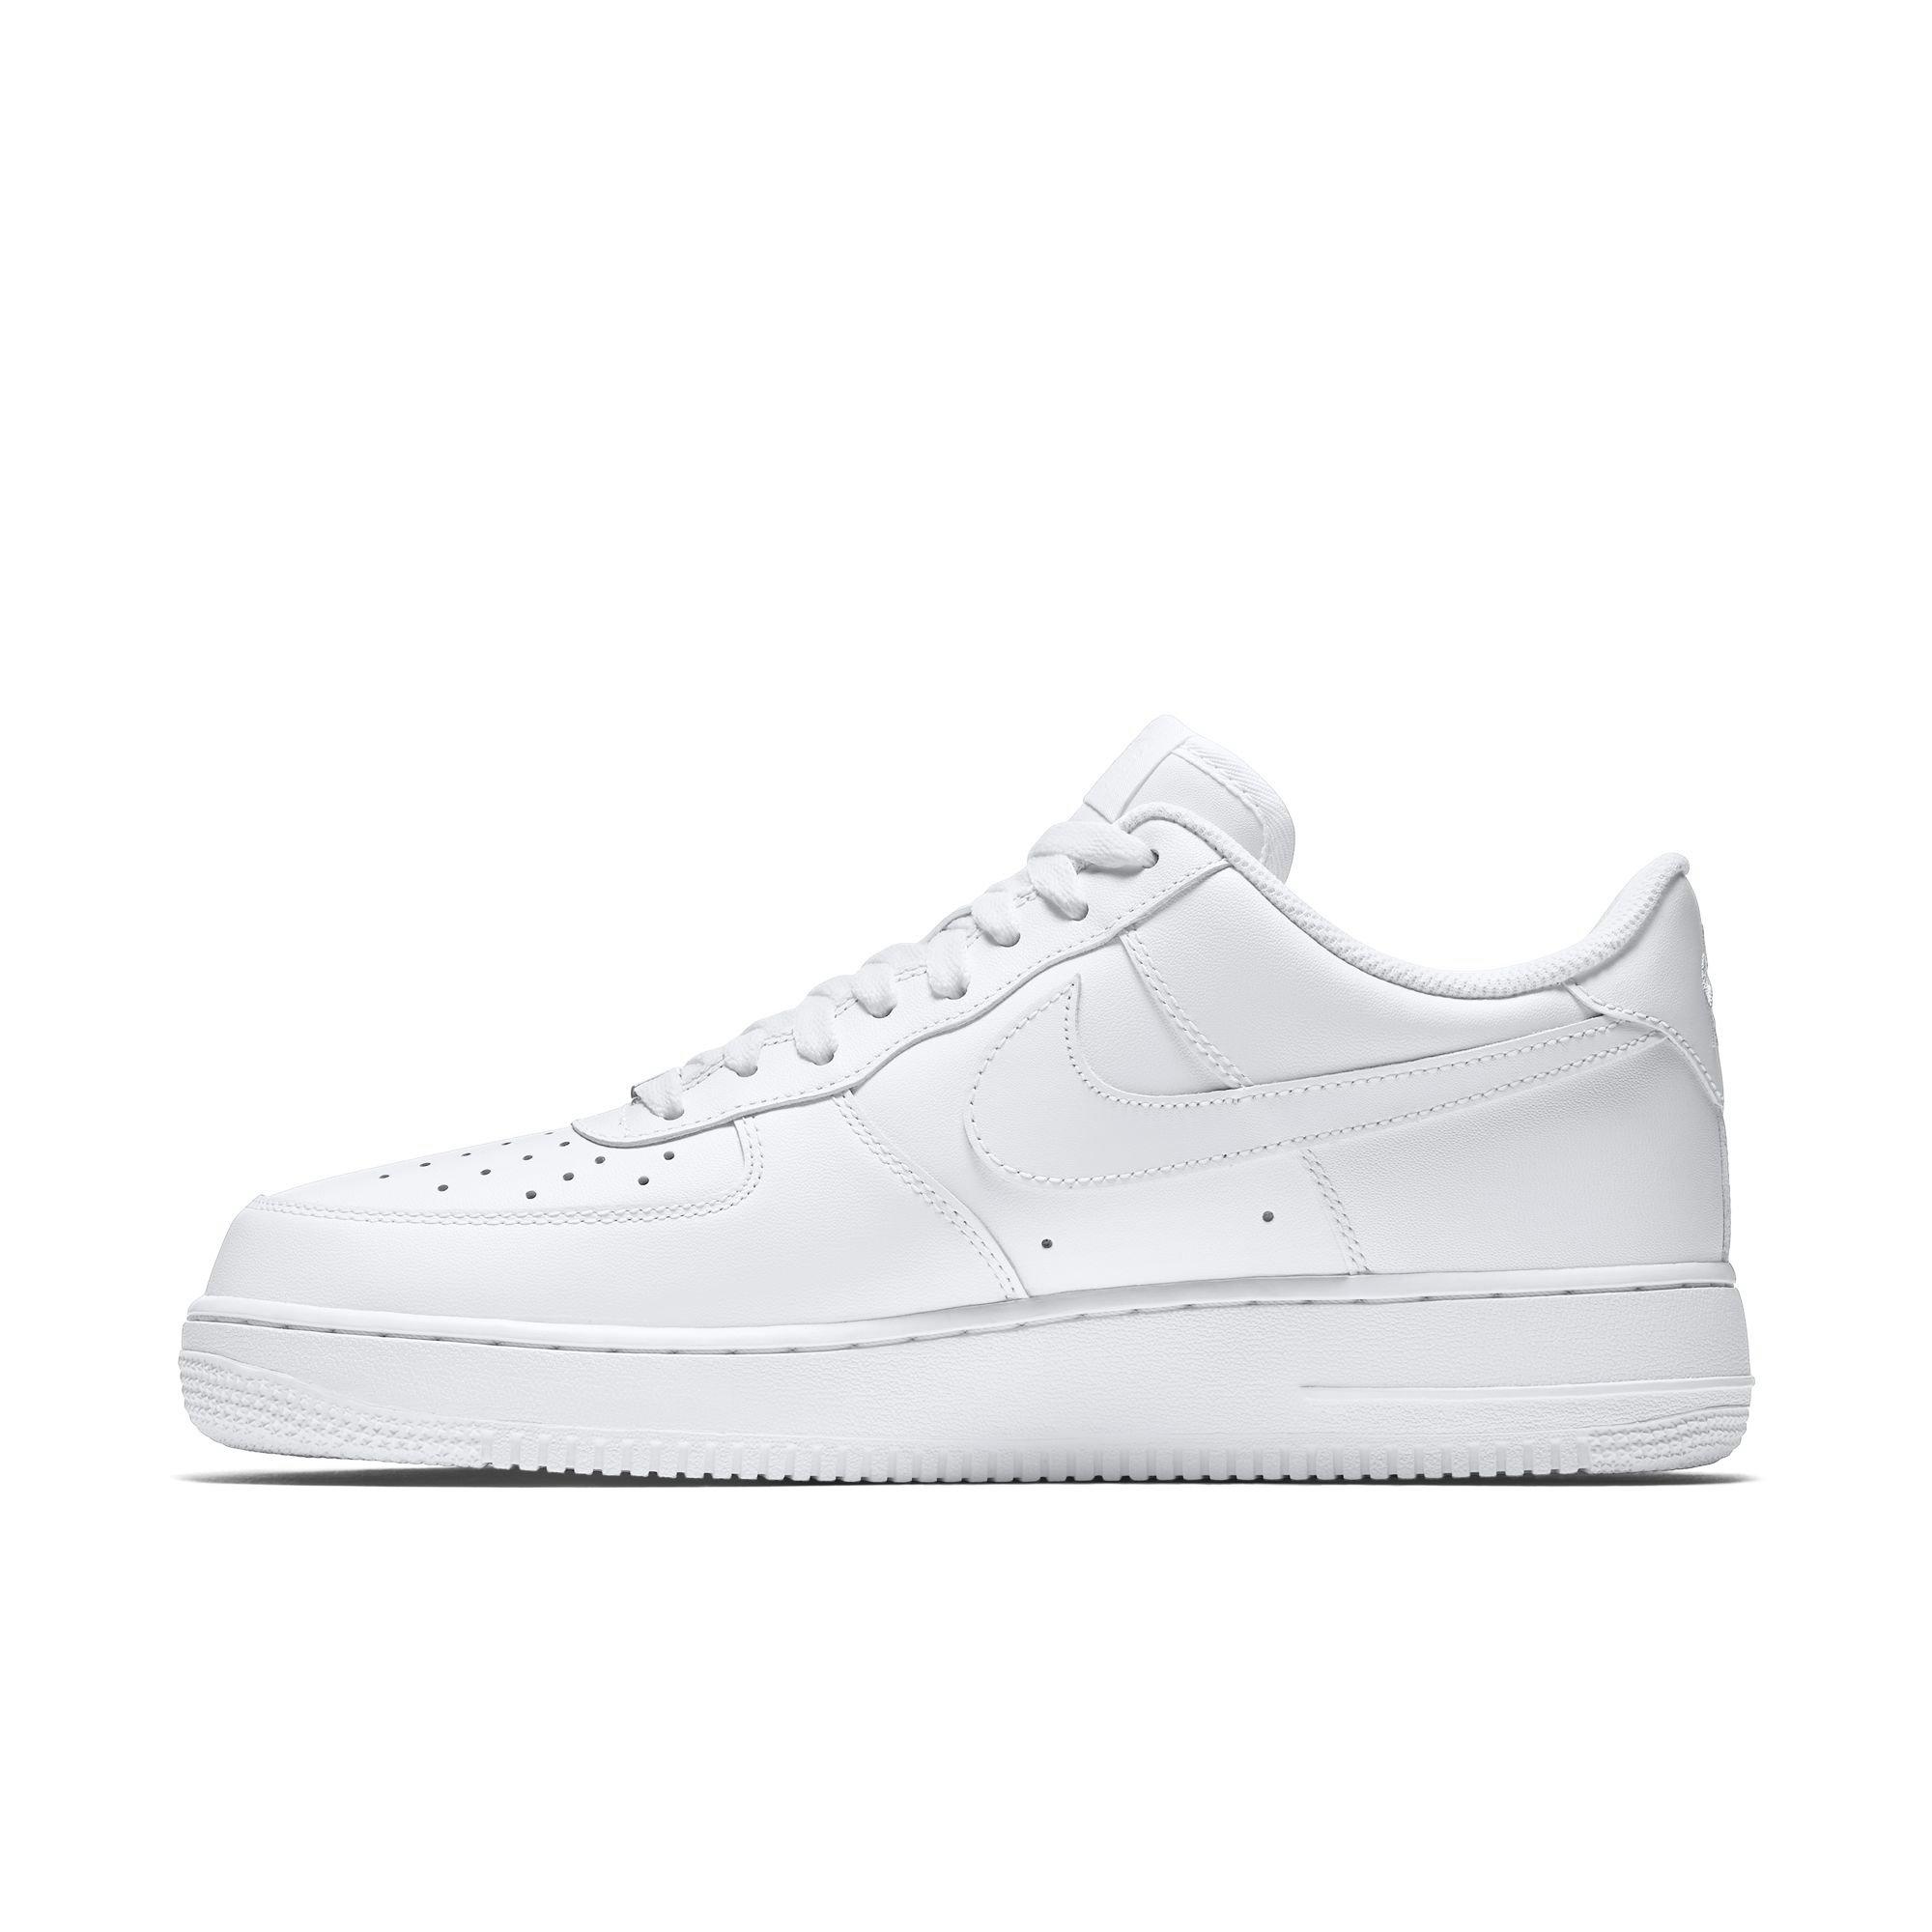 city gear shoes air force ones